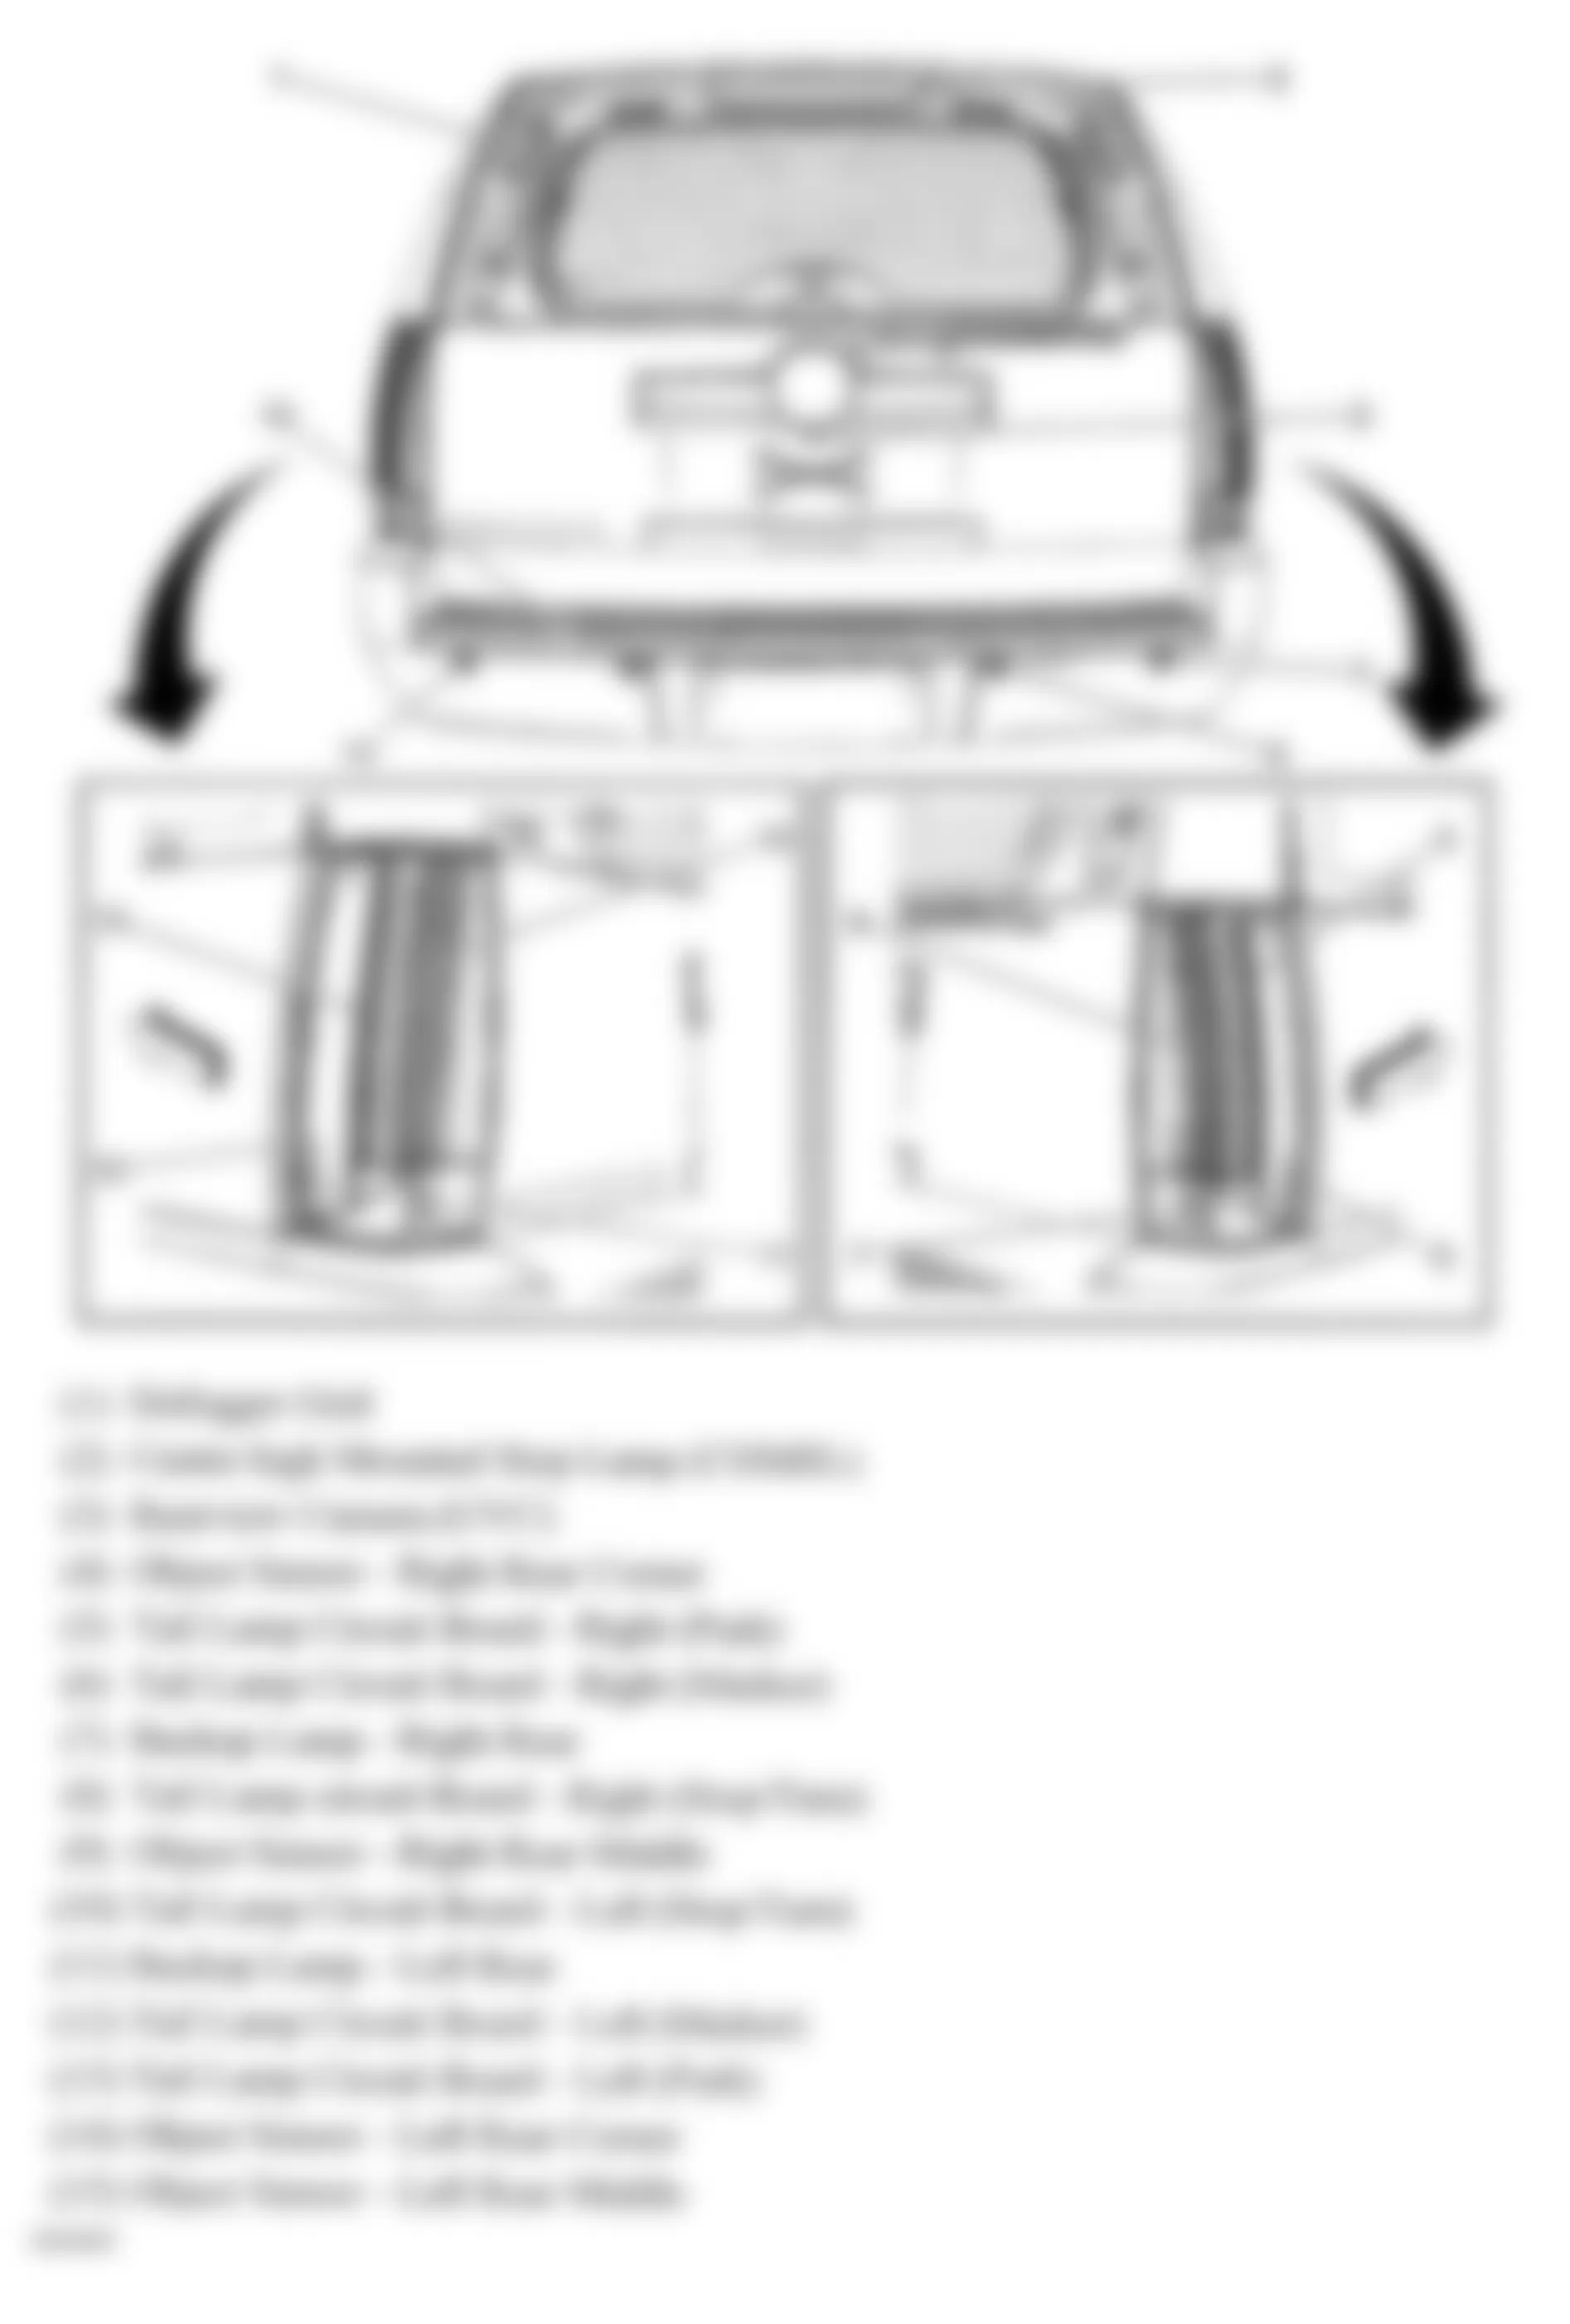 Chevrolet Tahoe 2009 - Component Locations -  Rear Of Vehicle (Tahoe & Escalade W/One Piece Liftgate)